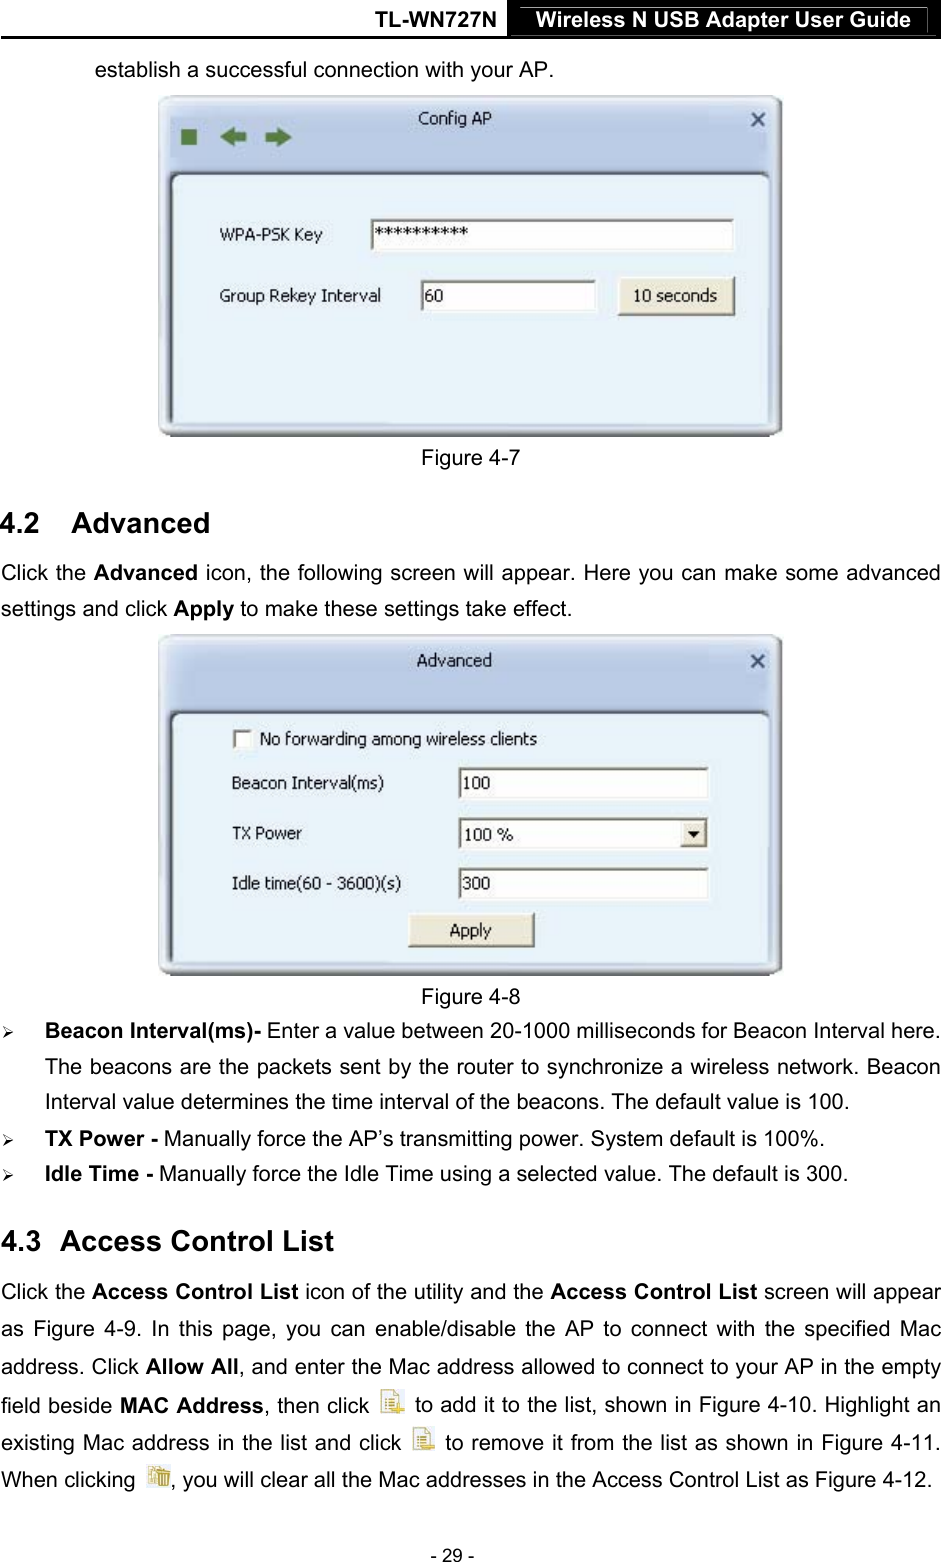 TL-WN727N Wireless N USB Adapter User Guide  - 29 - establish a successful connection with your AP.  Figure 4-7 4.2  17BAdvanced Click the Advanced icon, the following screen will appear. Here you can make some advanced settings and click Apply to make these settings take effect.    Figure 4-8 ¾ Beacon Interval(ms)- Enter a value between 20-1000 milliseconds for Beacon Interval here. The beacons are the packets sent by the router to synchronize a wireless network. Beacon Interval value determines the time interval of the beacons. The default value is 100. ¾ TX Power - Manually force the AP’s transmitting power. System default is 100%. ¾ Idle Time - Manually force the Idle Time using a selected value. The default is 300. 4.3  18BAccess Control List Click the Access Control List icon of the utility and the Access Control List screen will appear as  XFigure 4-9X. In this page, you can enable/disable the AP to connect with the specified Mac address. Click Allow All, and enter the Mac address allowed to connect to your AP in the empty field beside MAC Address, then click    to add it to the list, shown in XFigure 4-10X. Highlight an existing Mac address in the list and click    to remove it from the list as shown in XFigure 4-11X. When clicking  , you will clear all the Mac addresses in the Access Control List as XFigure 4-12X. 